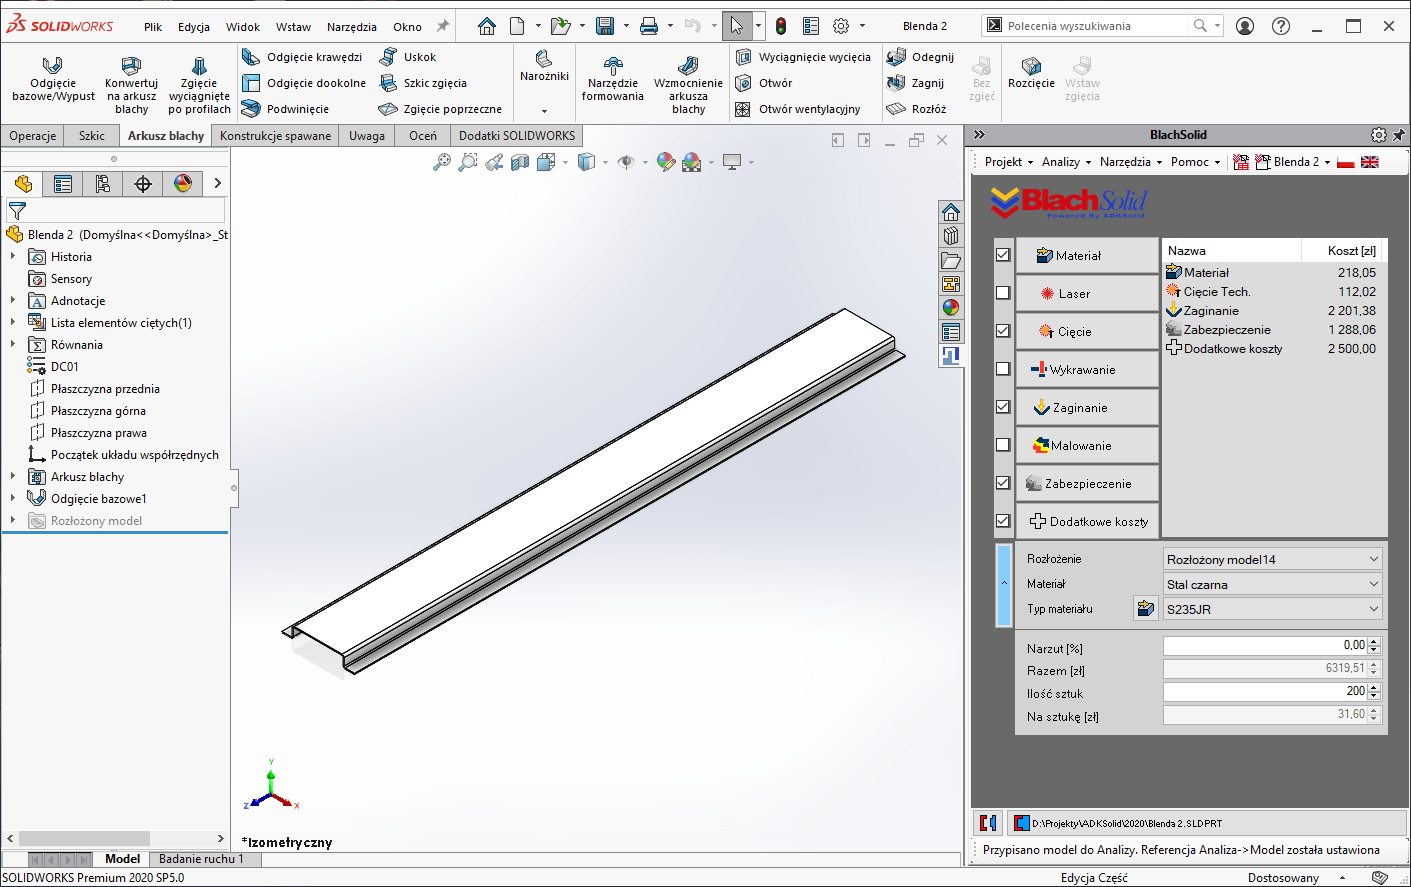 interfejs-blachsolid-solidworks-cwsystems